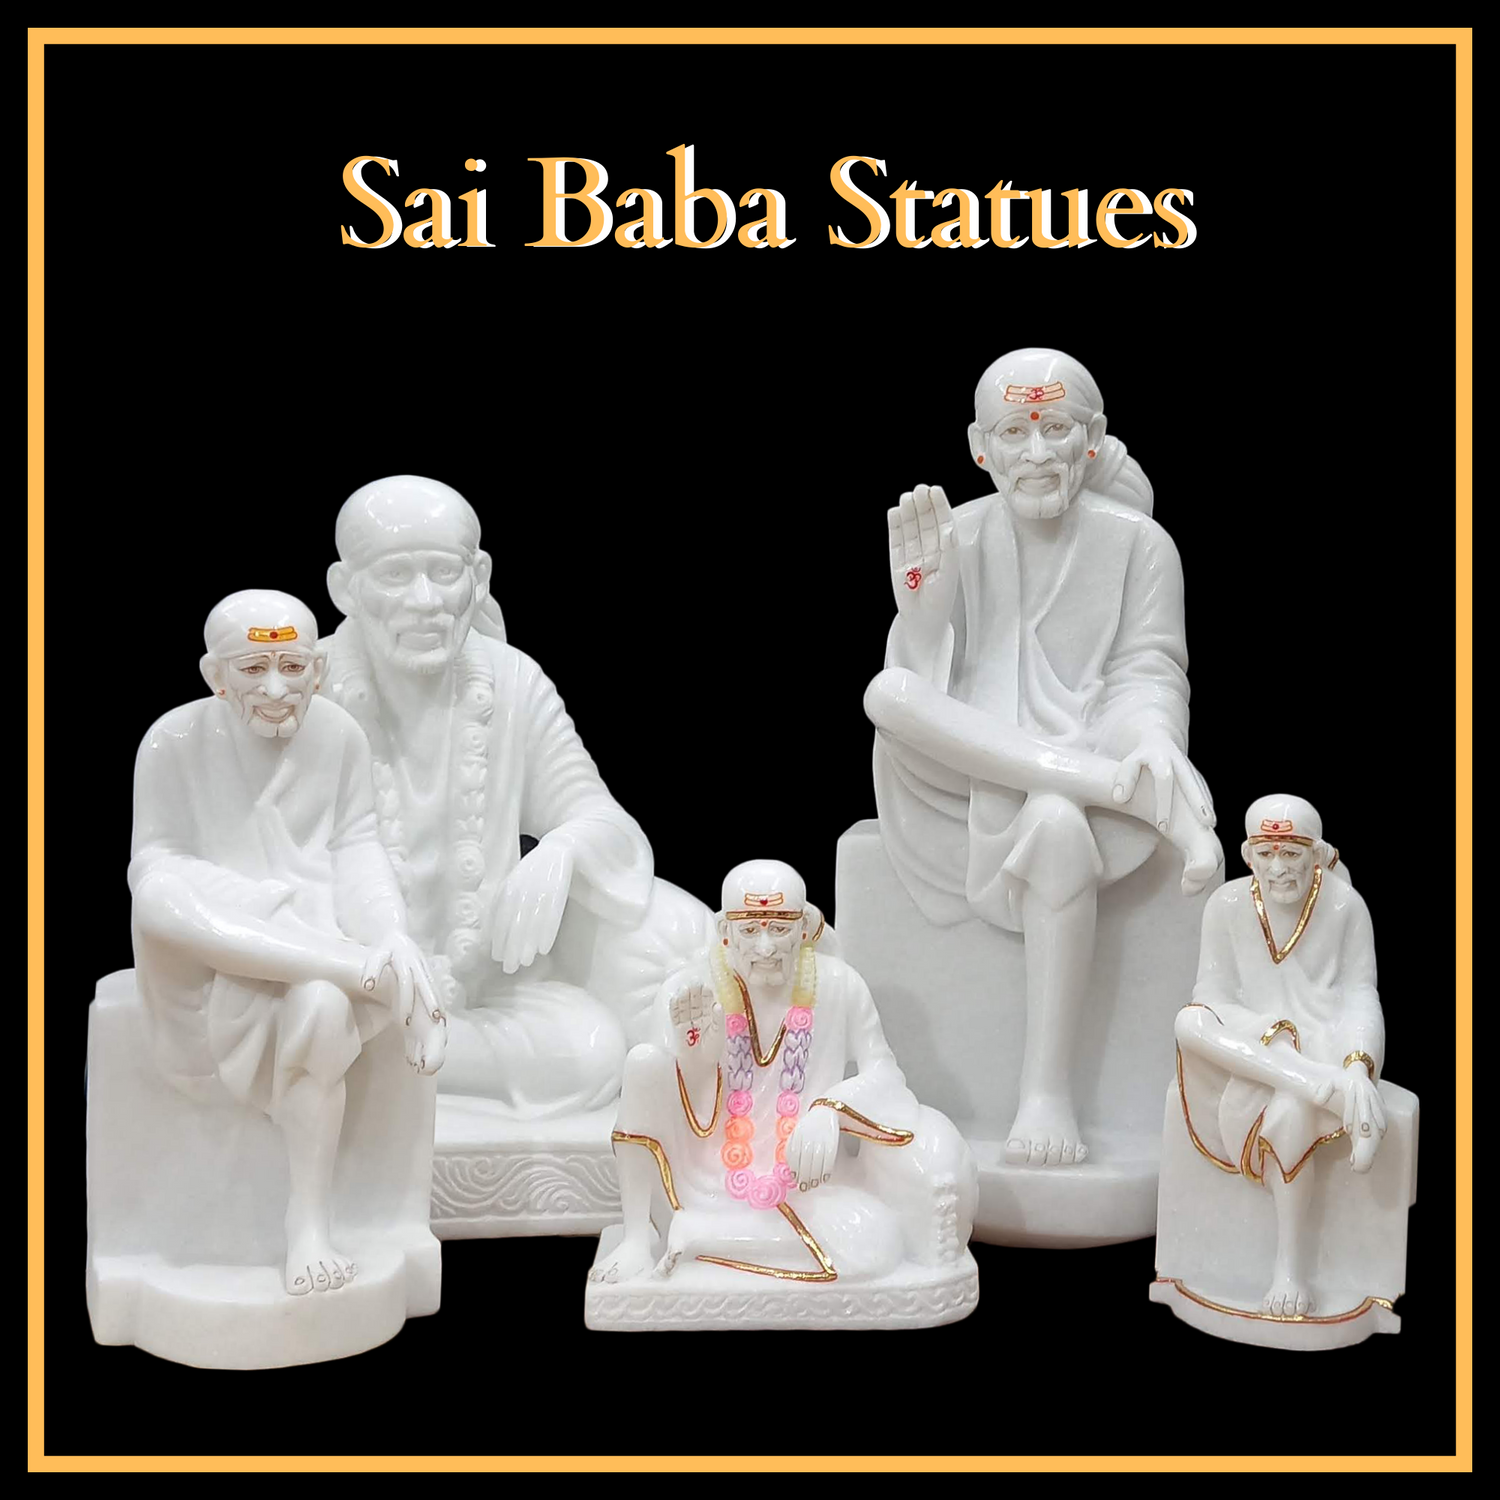 Marble Sai Baba Statues in all Sizes